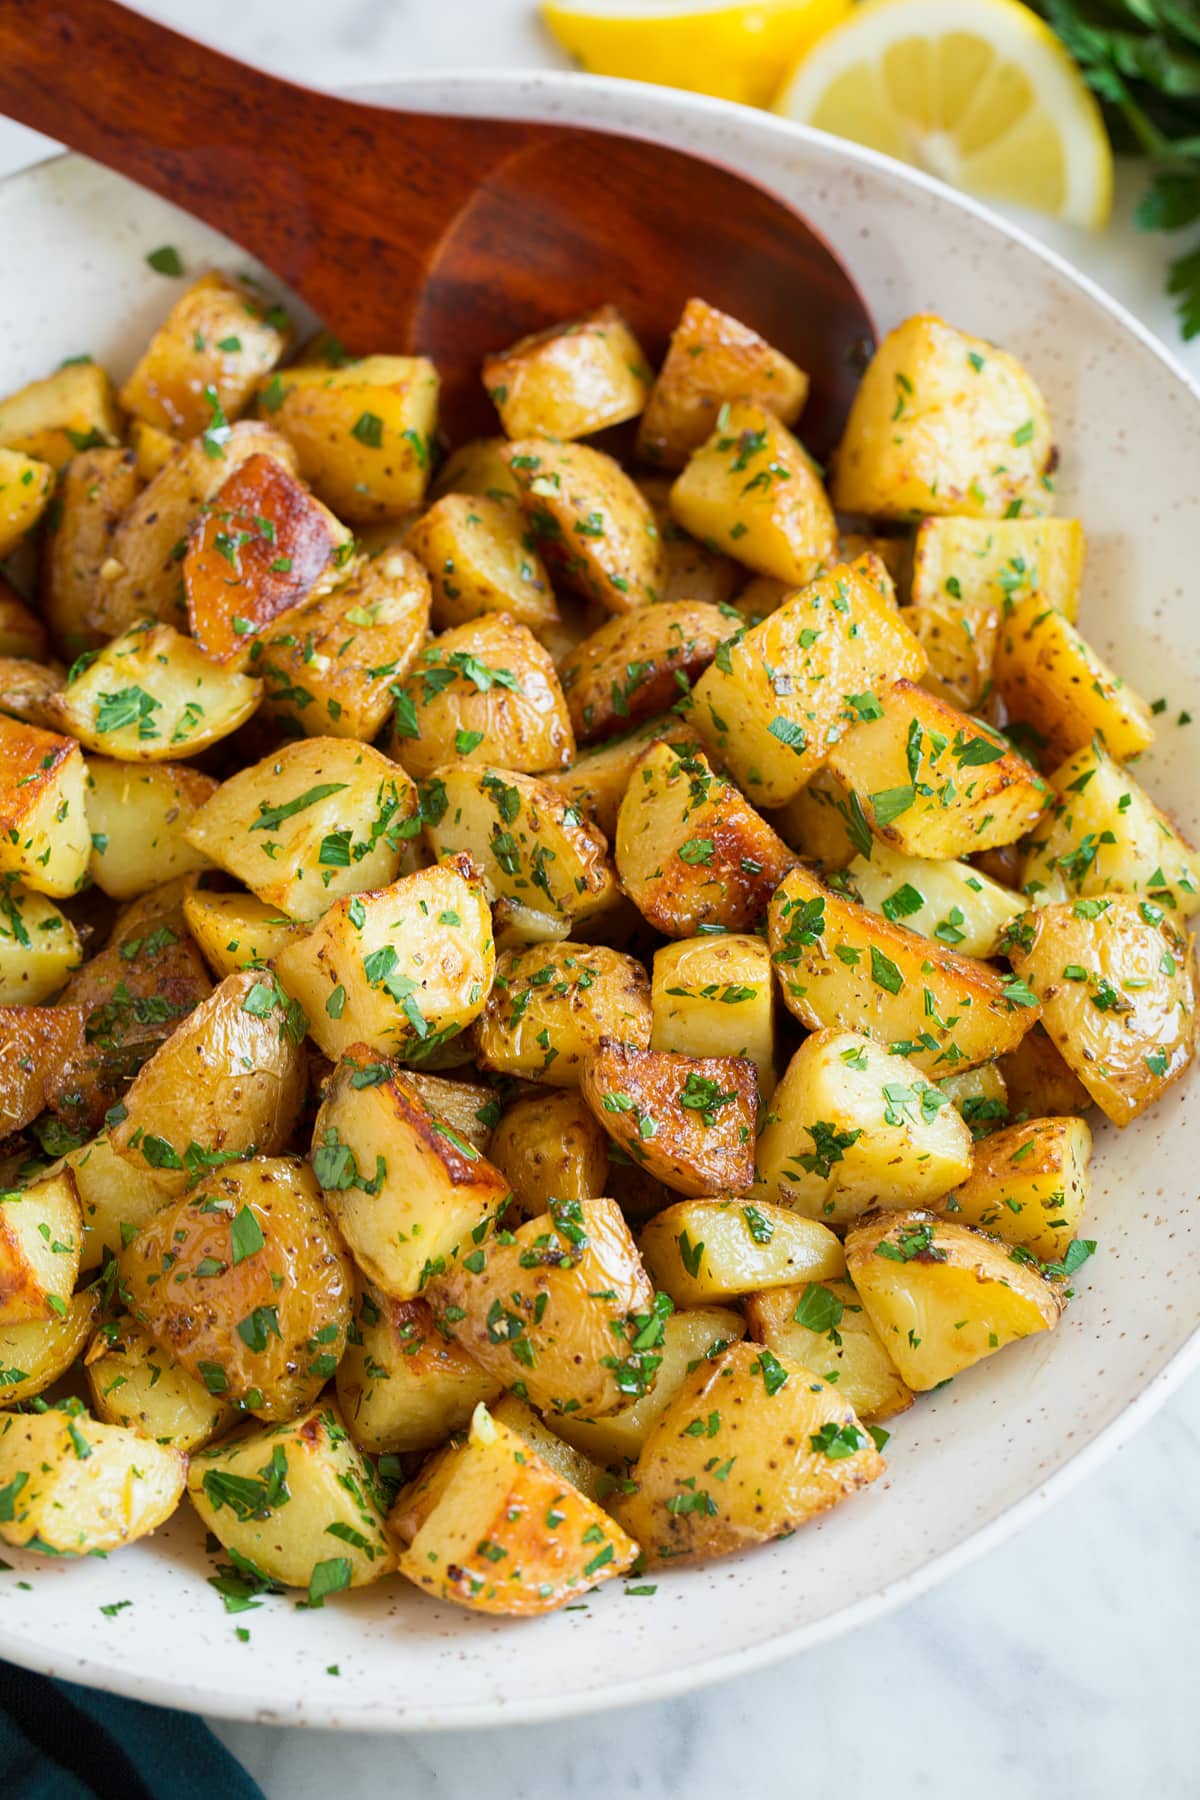 Bowl of roasted potatoes with lemon and parsley, wooden spoon is resting in potatoes.